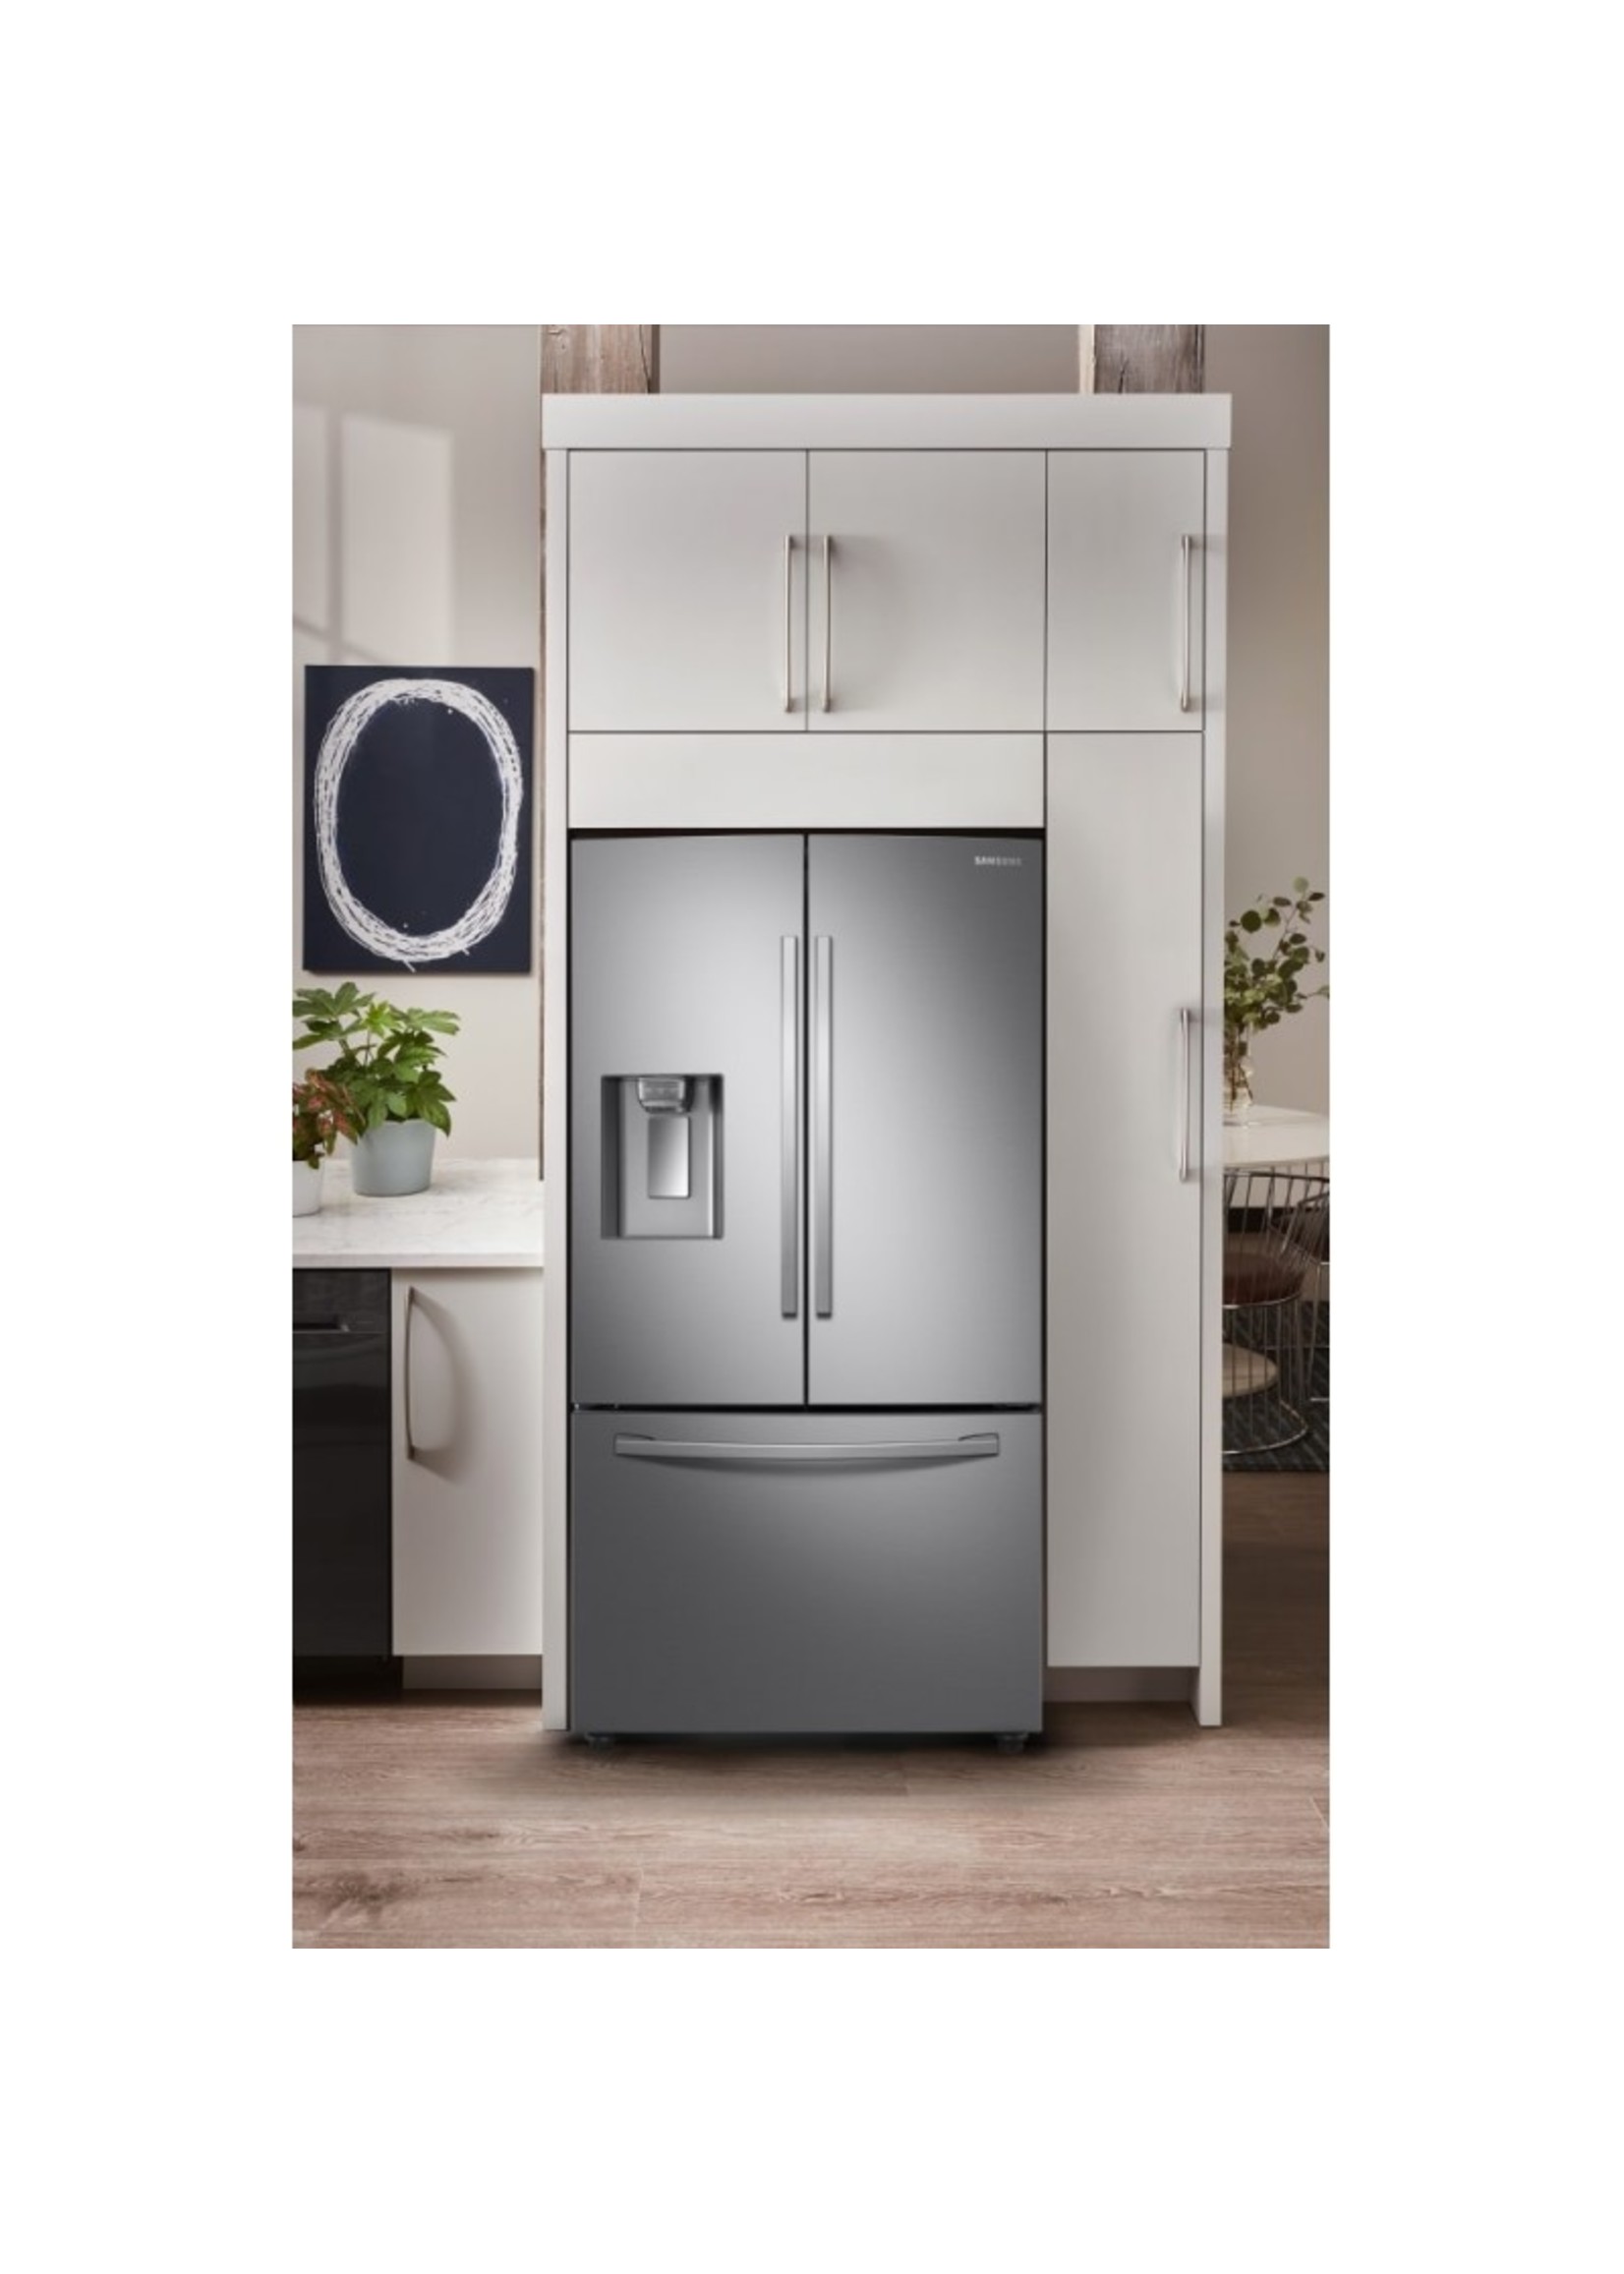 SAMSUNG SAMSUNG 23 cu. ft. 3-Door French Door Refrigerator in Stainless Steel with CoolSelect Pantry, Counter Depth